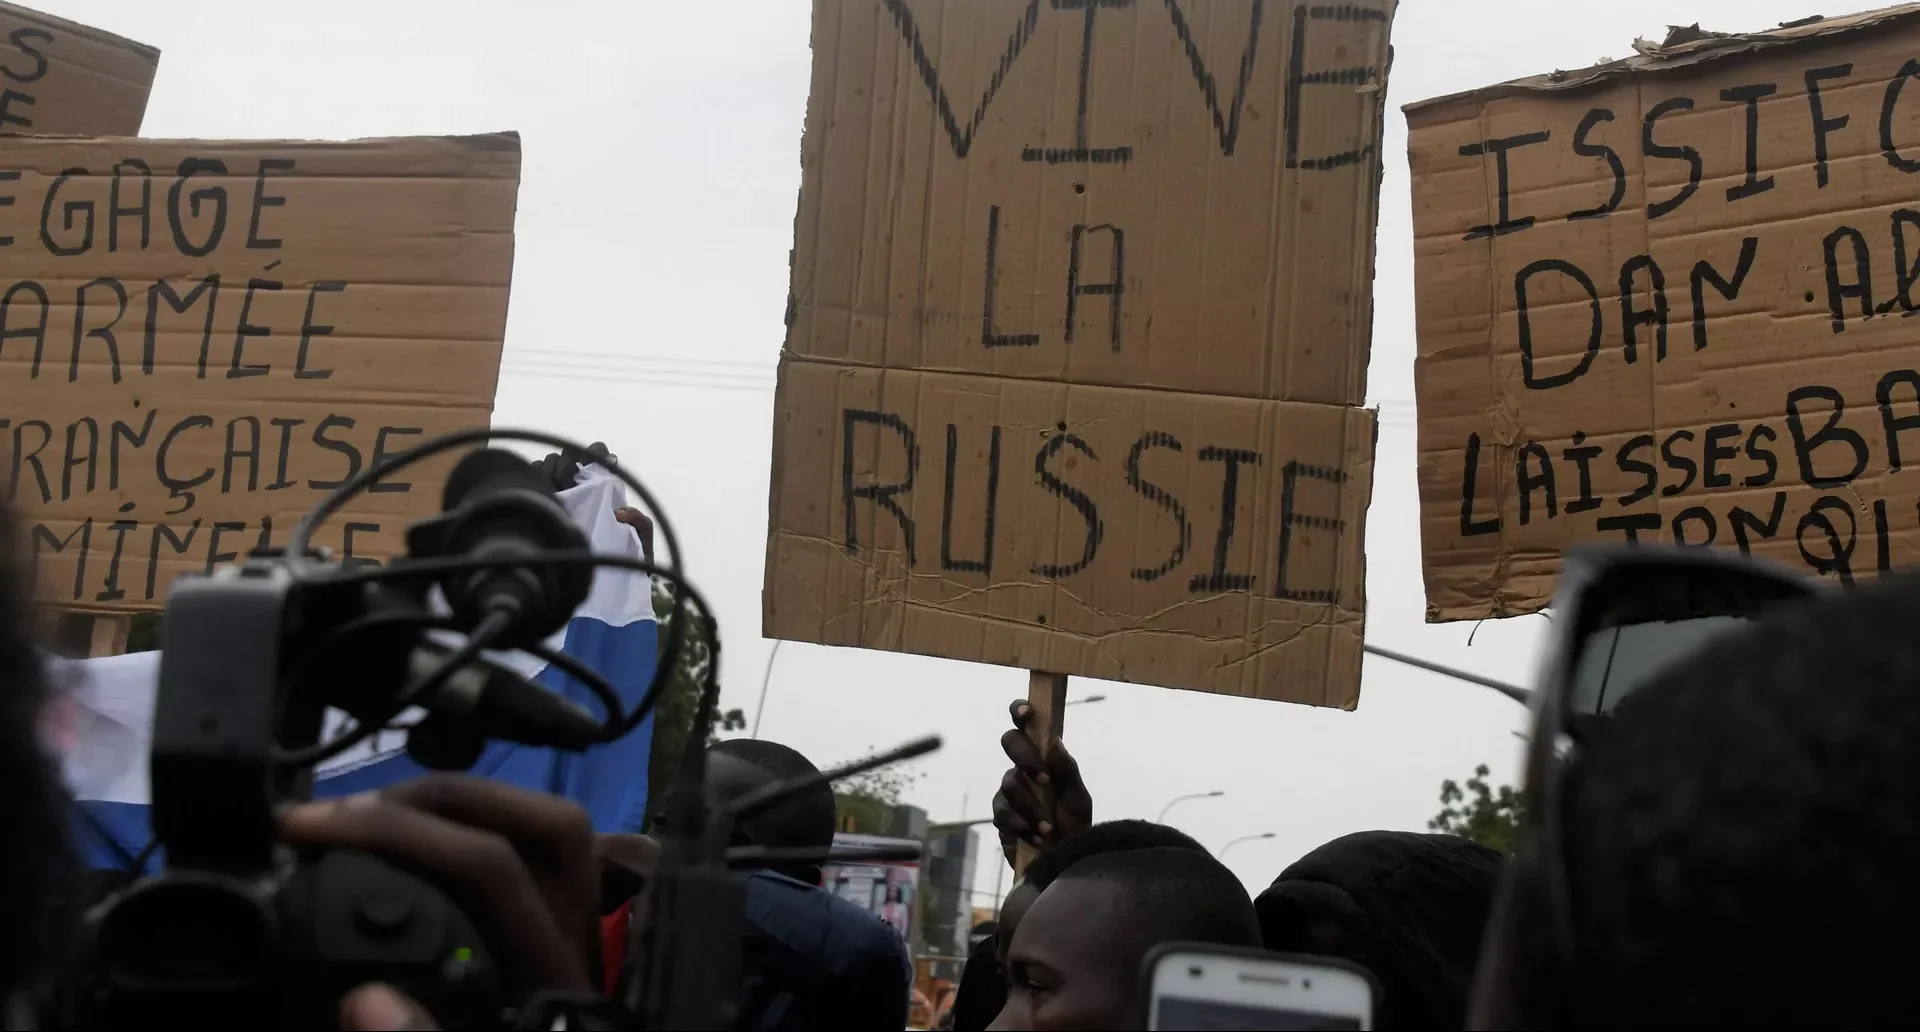 People protesting in the street and carrying signs, one says: "Vive la Russie." Photo: AFP 2022/Boureima Hama.